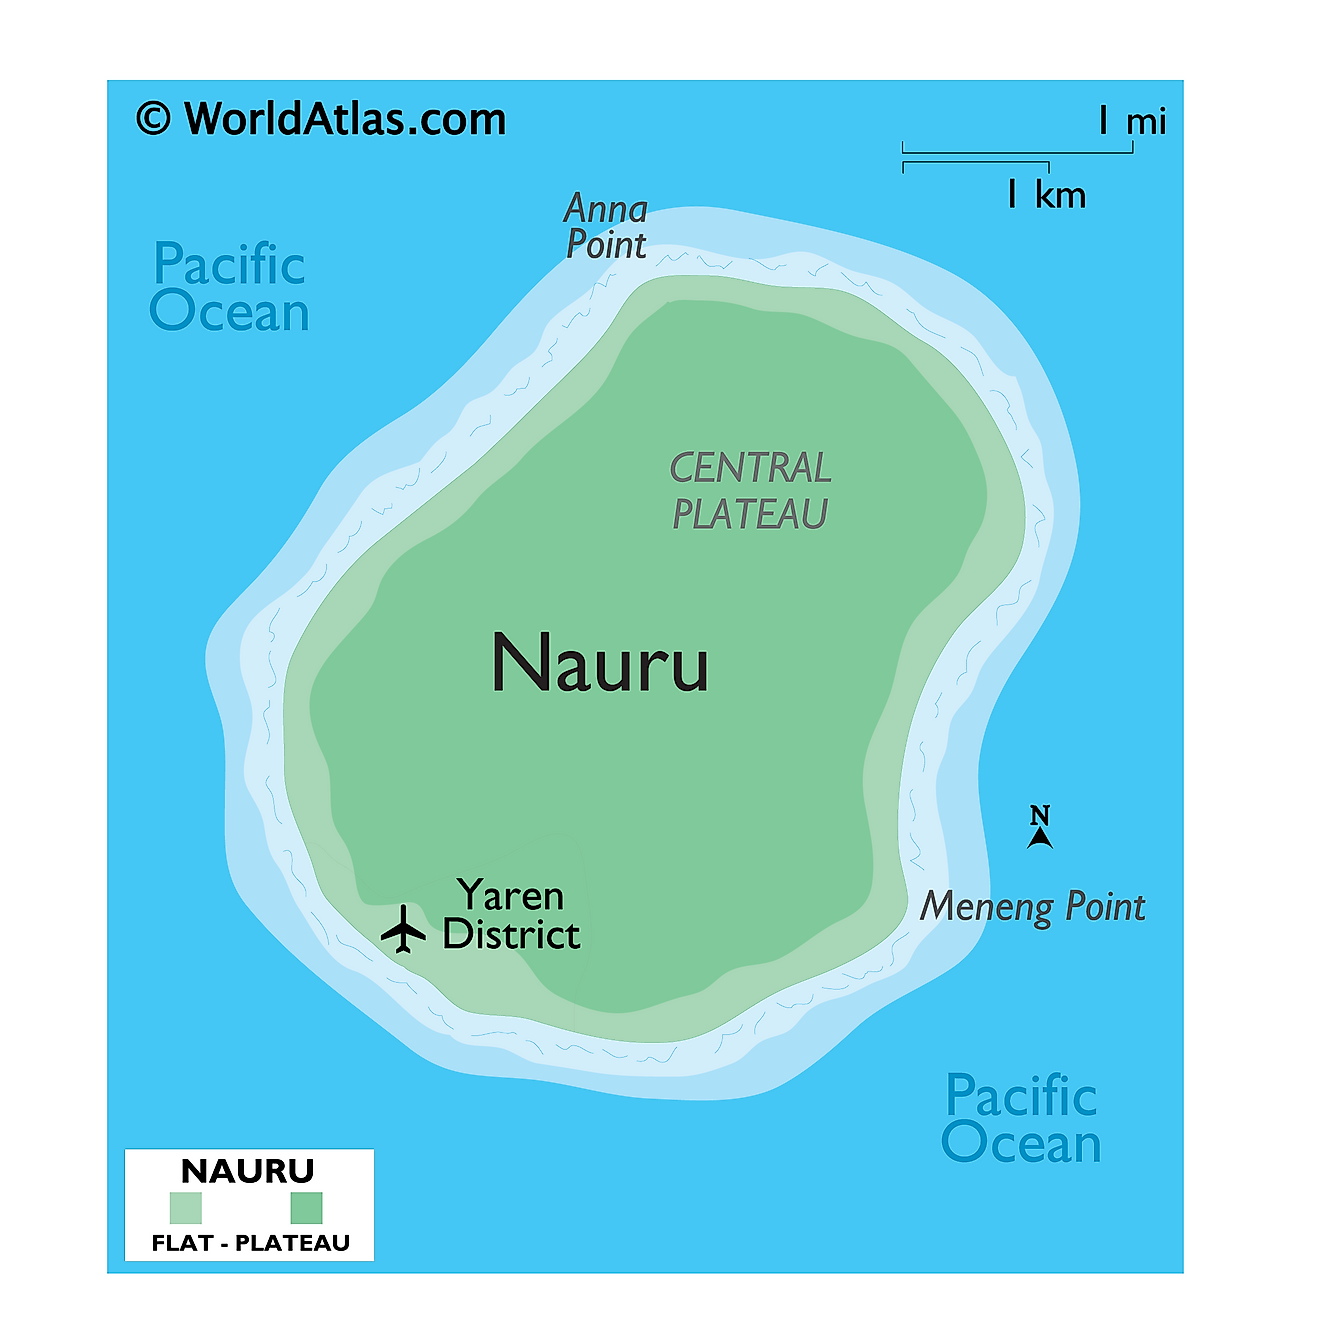 Physical Map of Nauru showing its relief, Central Plateau, important points, and surrounding Pacific Ocean.